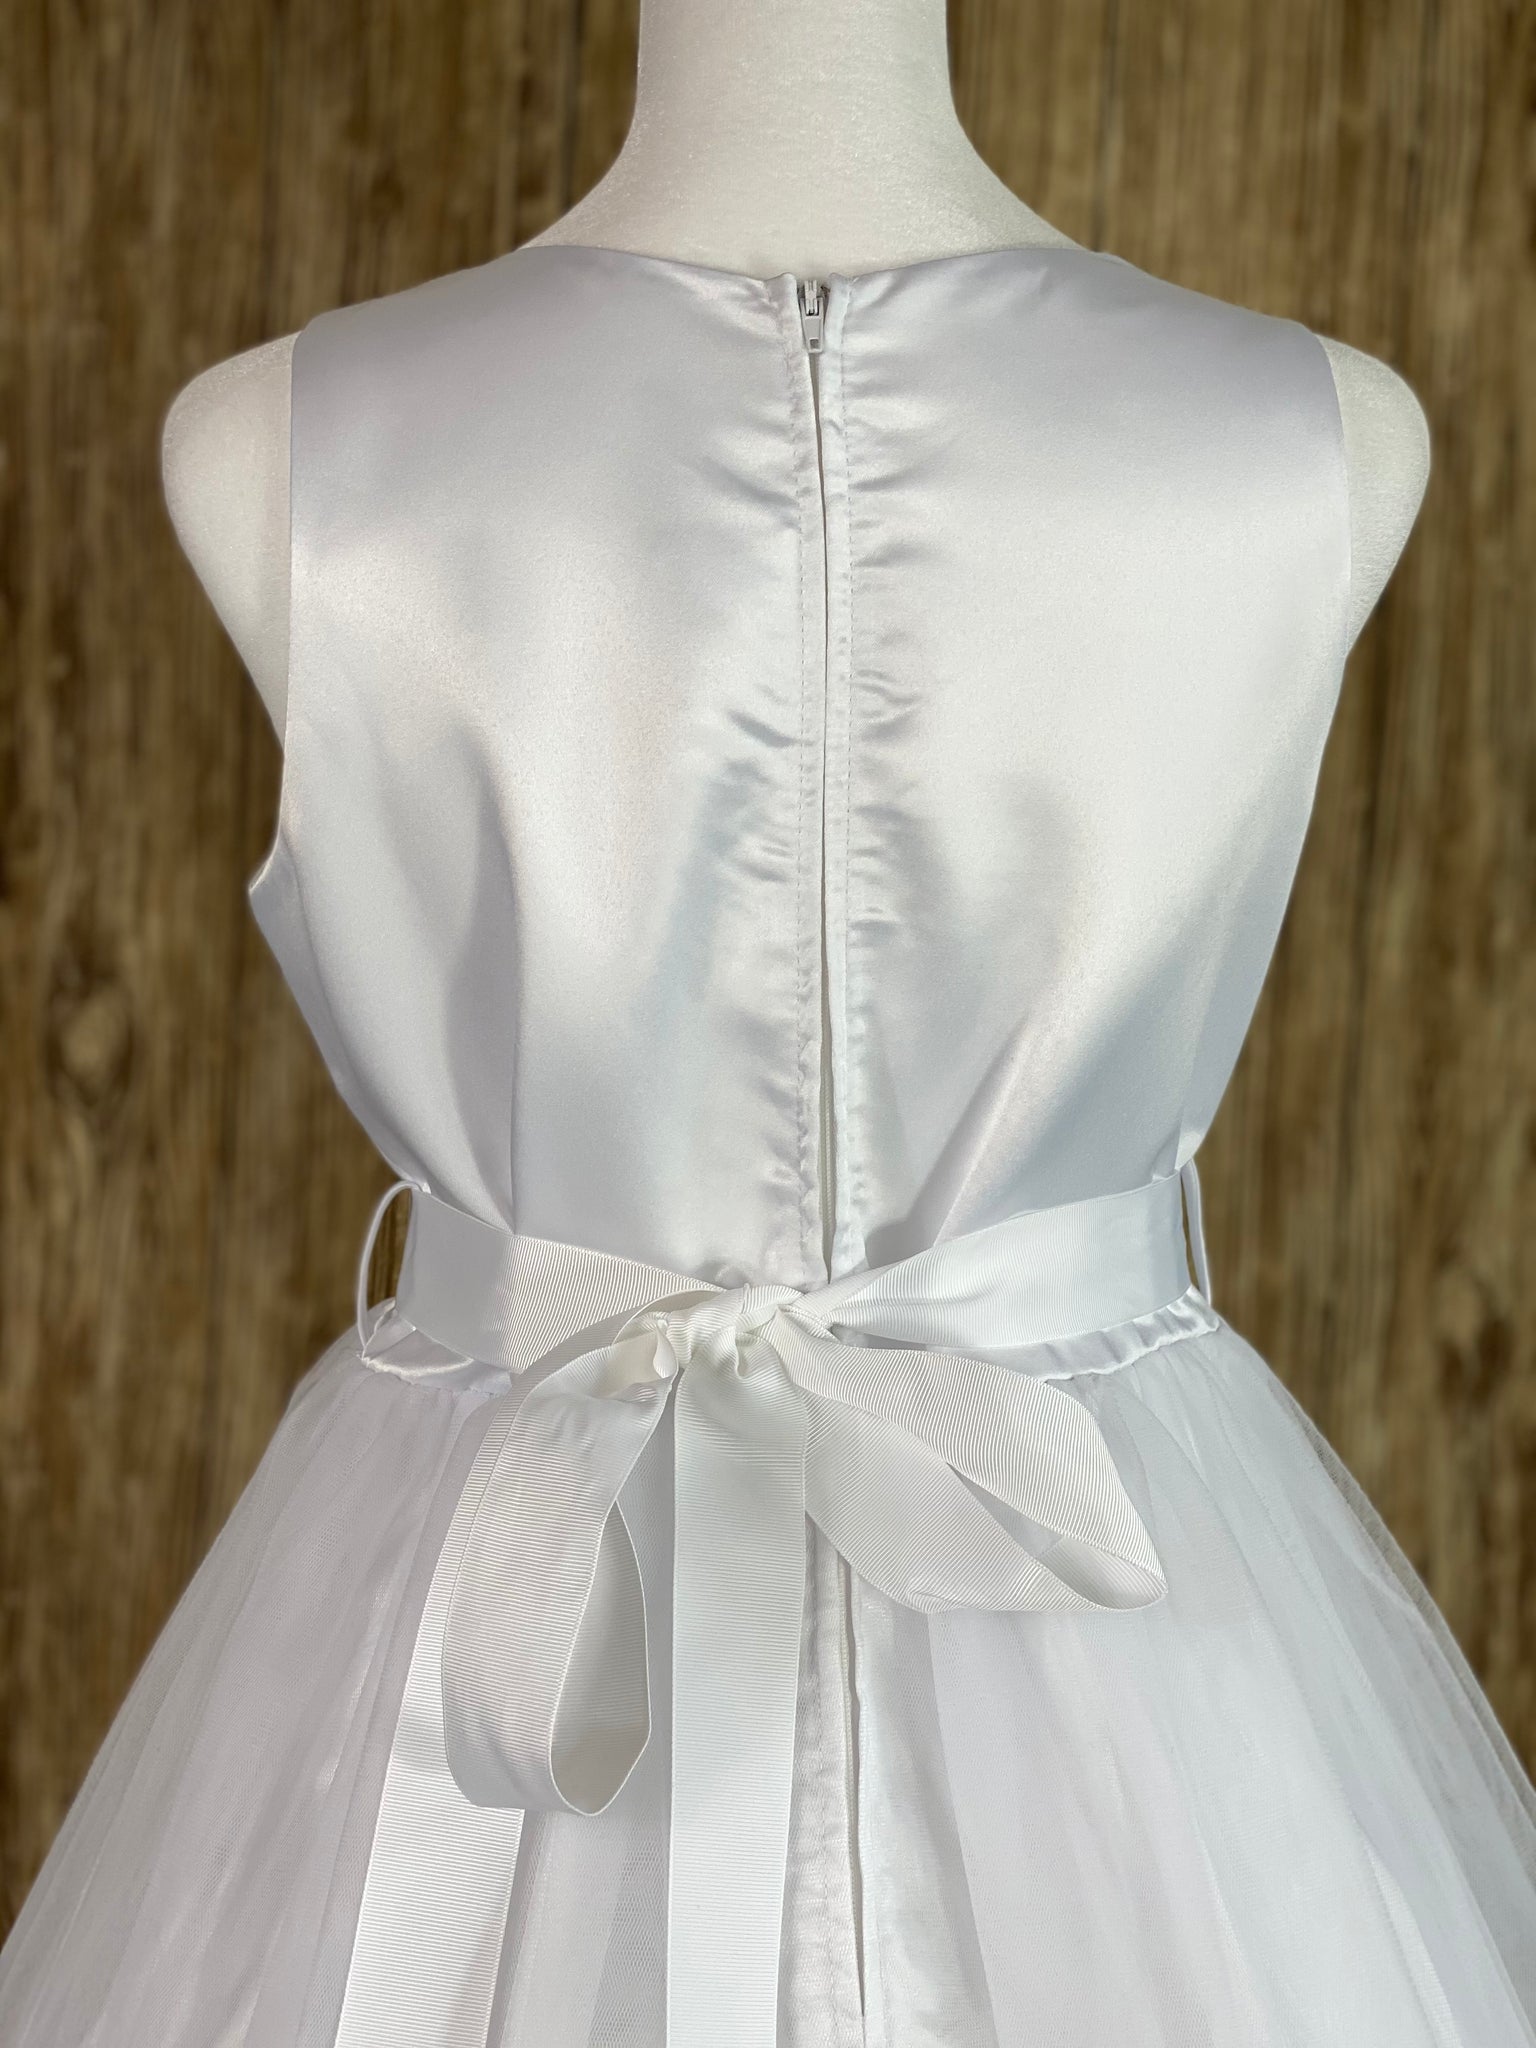 Paneled satin bodice Tulle skirt with lace edge Ribbon rhinestone and pearl with satin leaves belt Zipper closure Ribbon bow in back